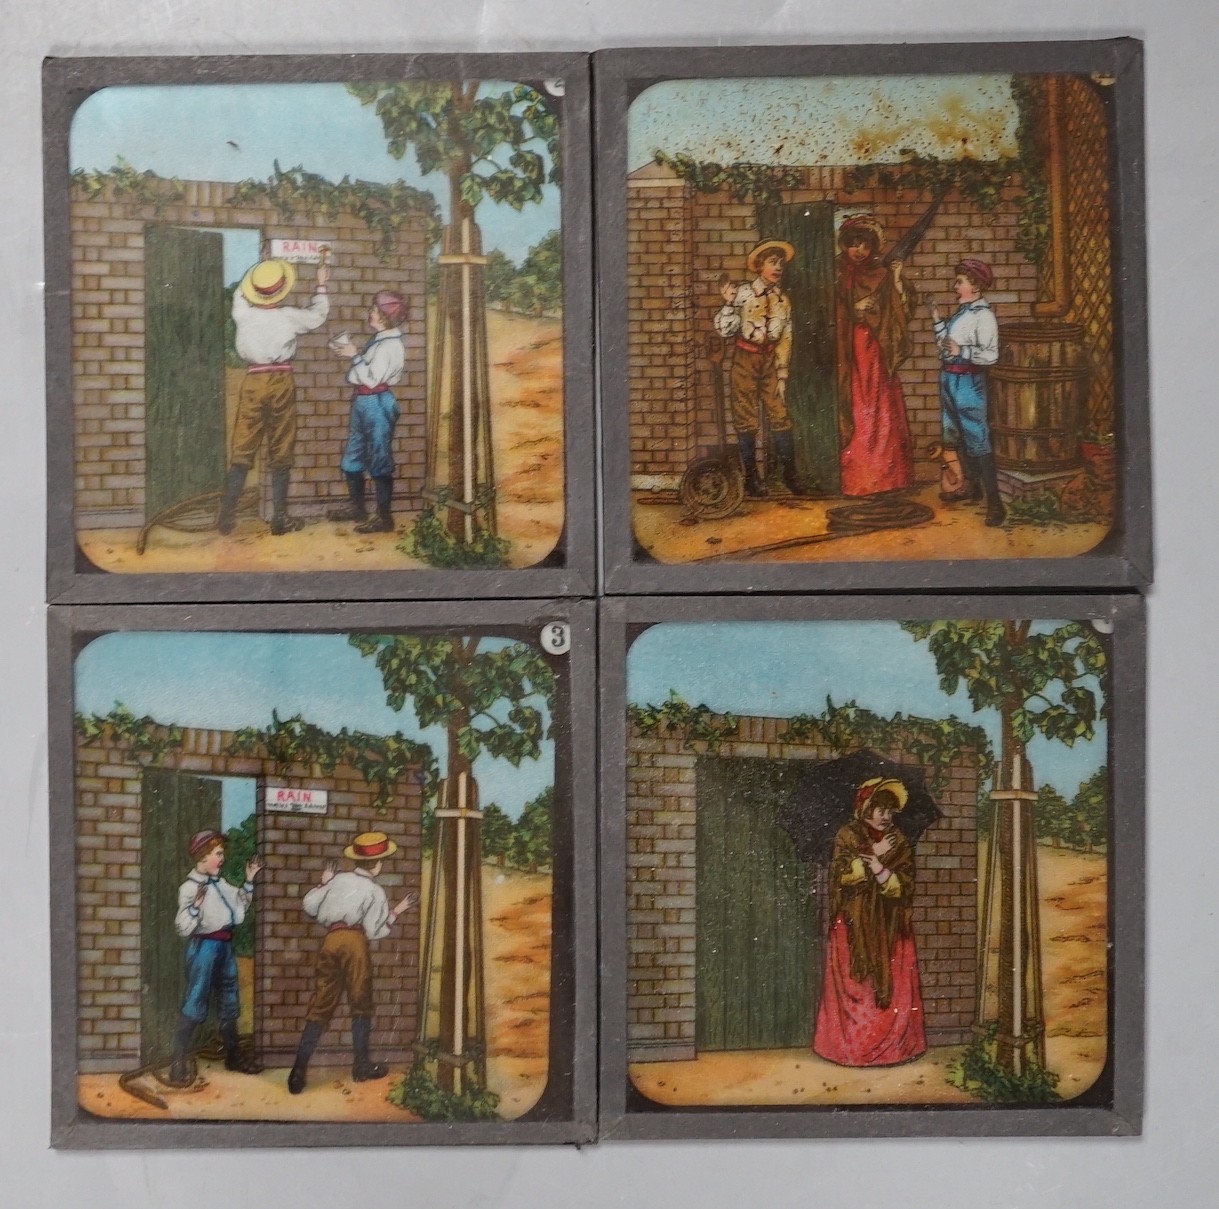 A collection of approximately 300 magic lantern slides